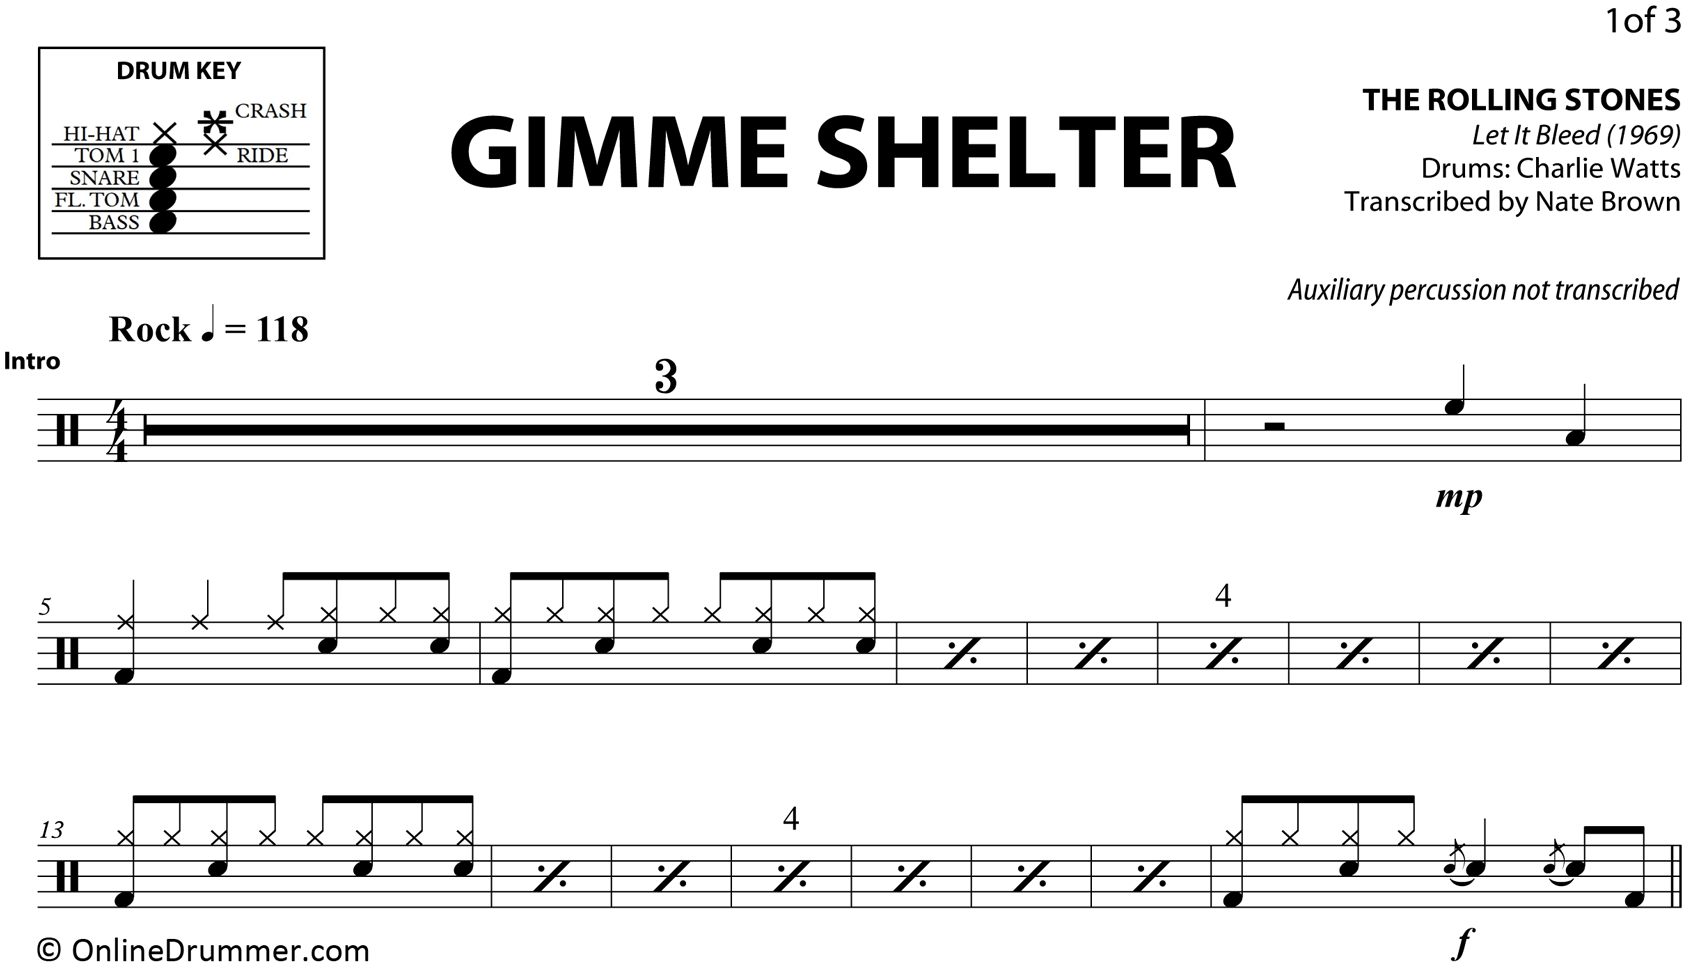 Gimme Shelter - The Rolling Stones - Drum Sheet Music